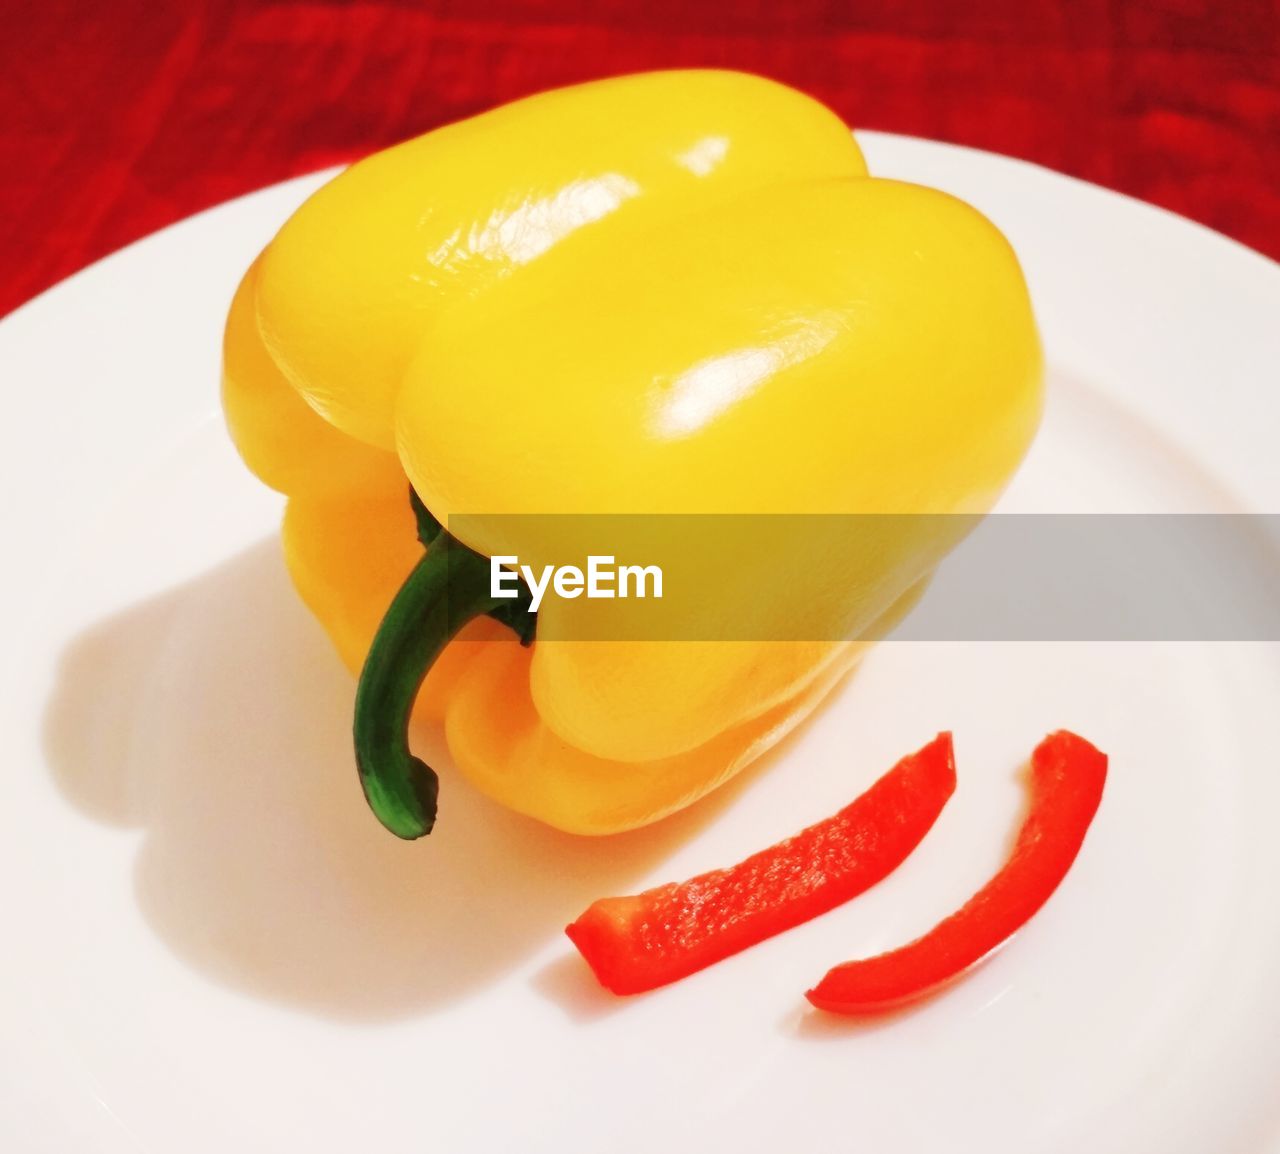 CLOSE-UP OF RED BELL PEPPERS ON PLATE